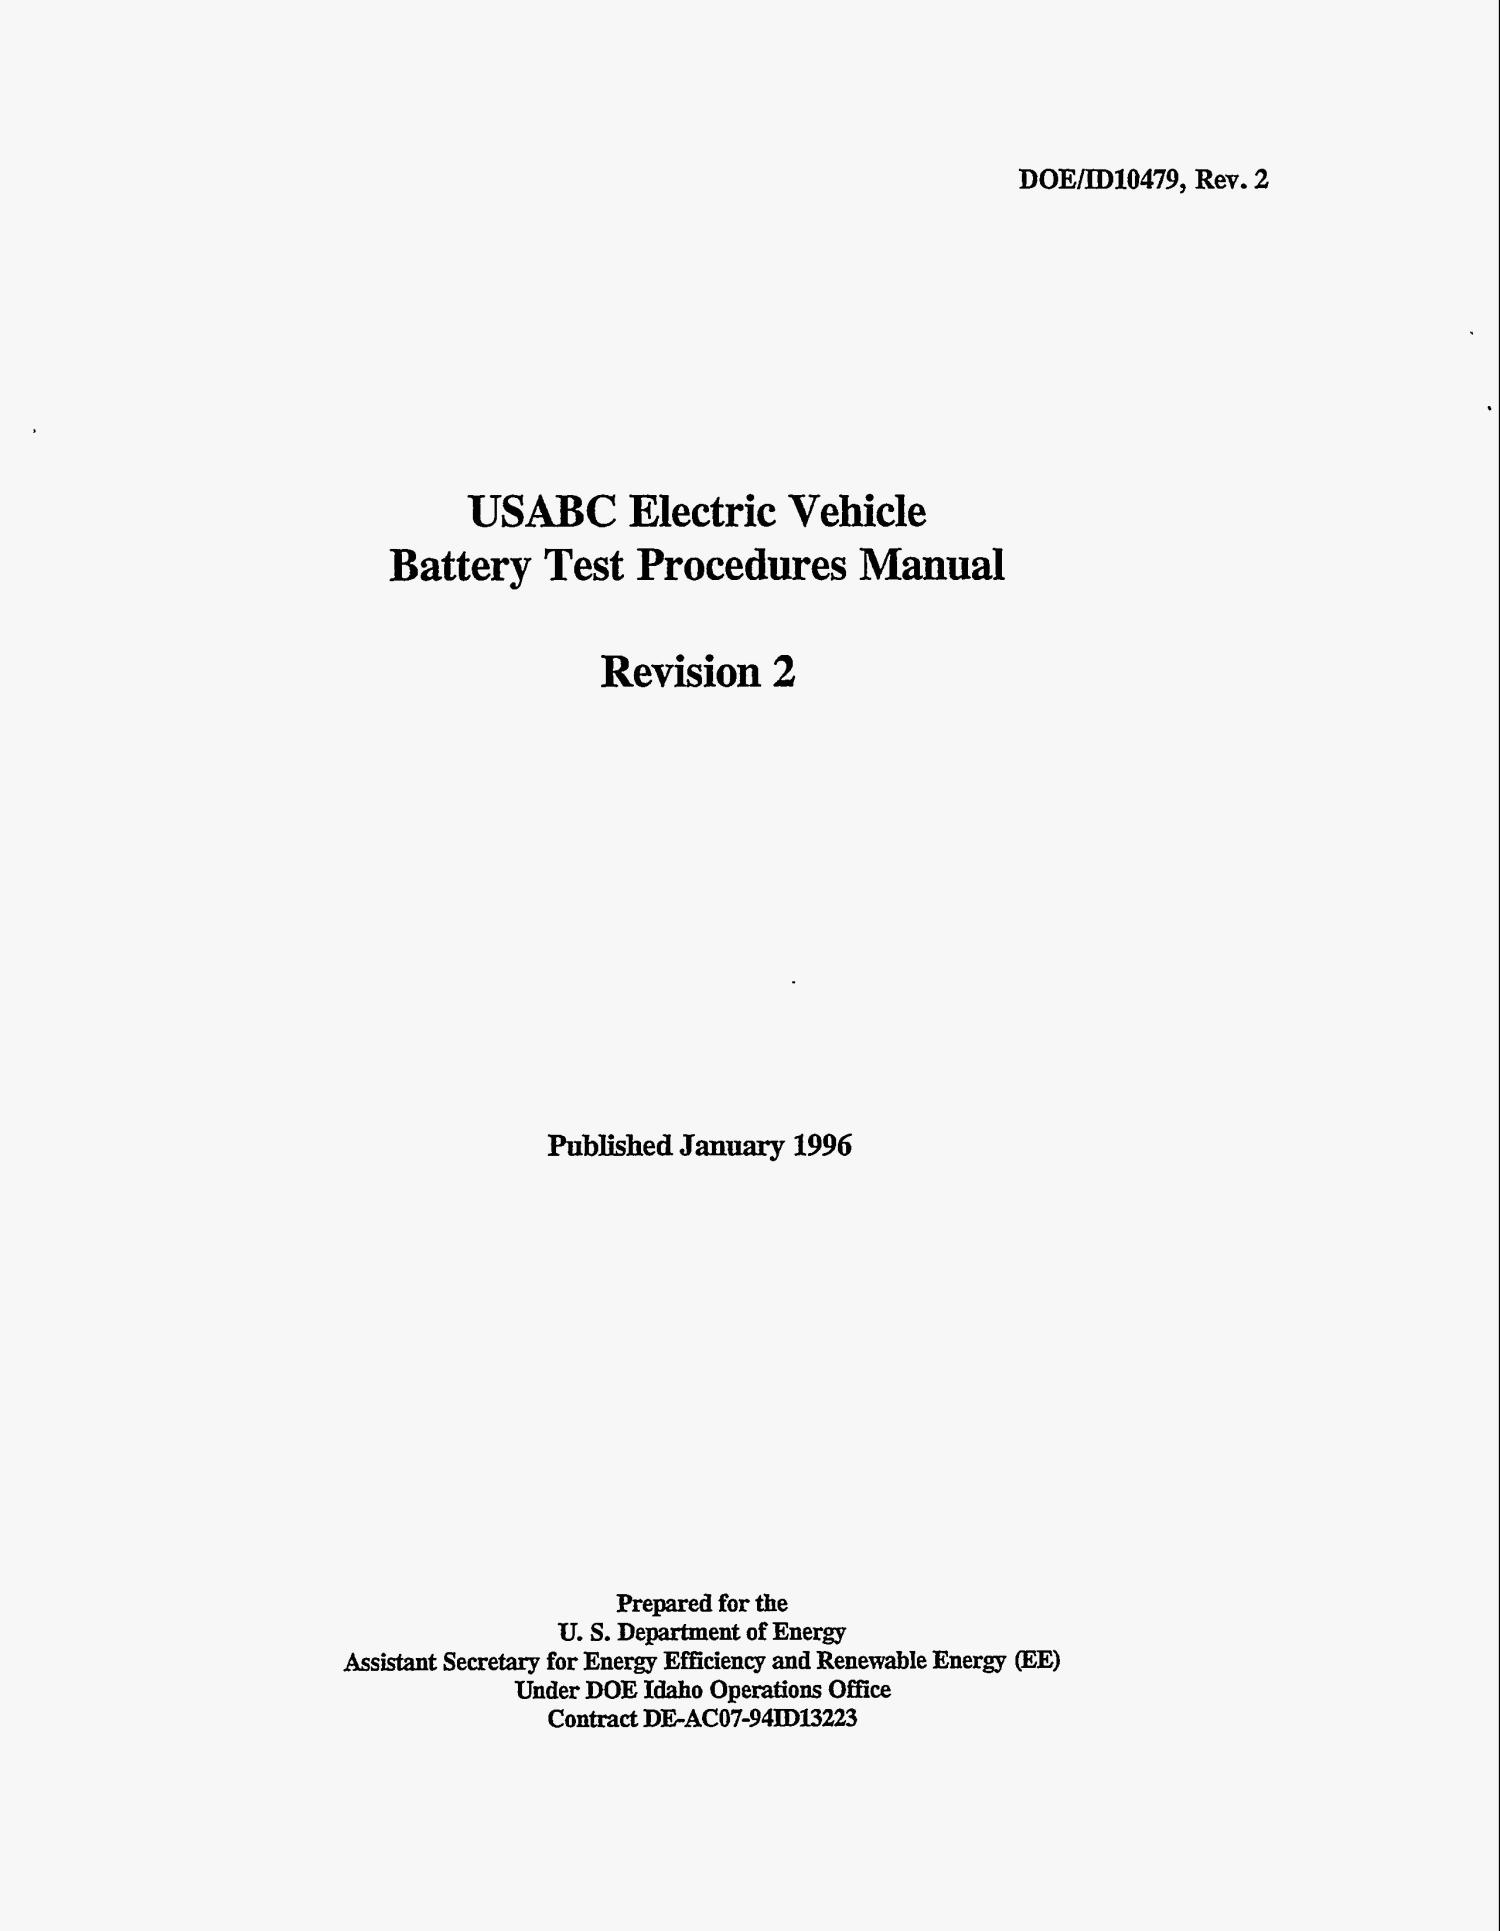 USABC electric vehicle Battery Test Procedures Manual. Revision 2
                                                
                                                    [Sequence #]: 3 of 158
                                                